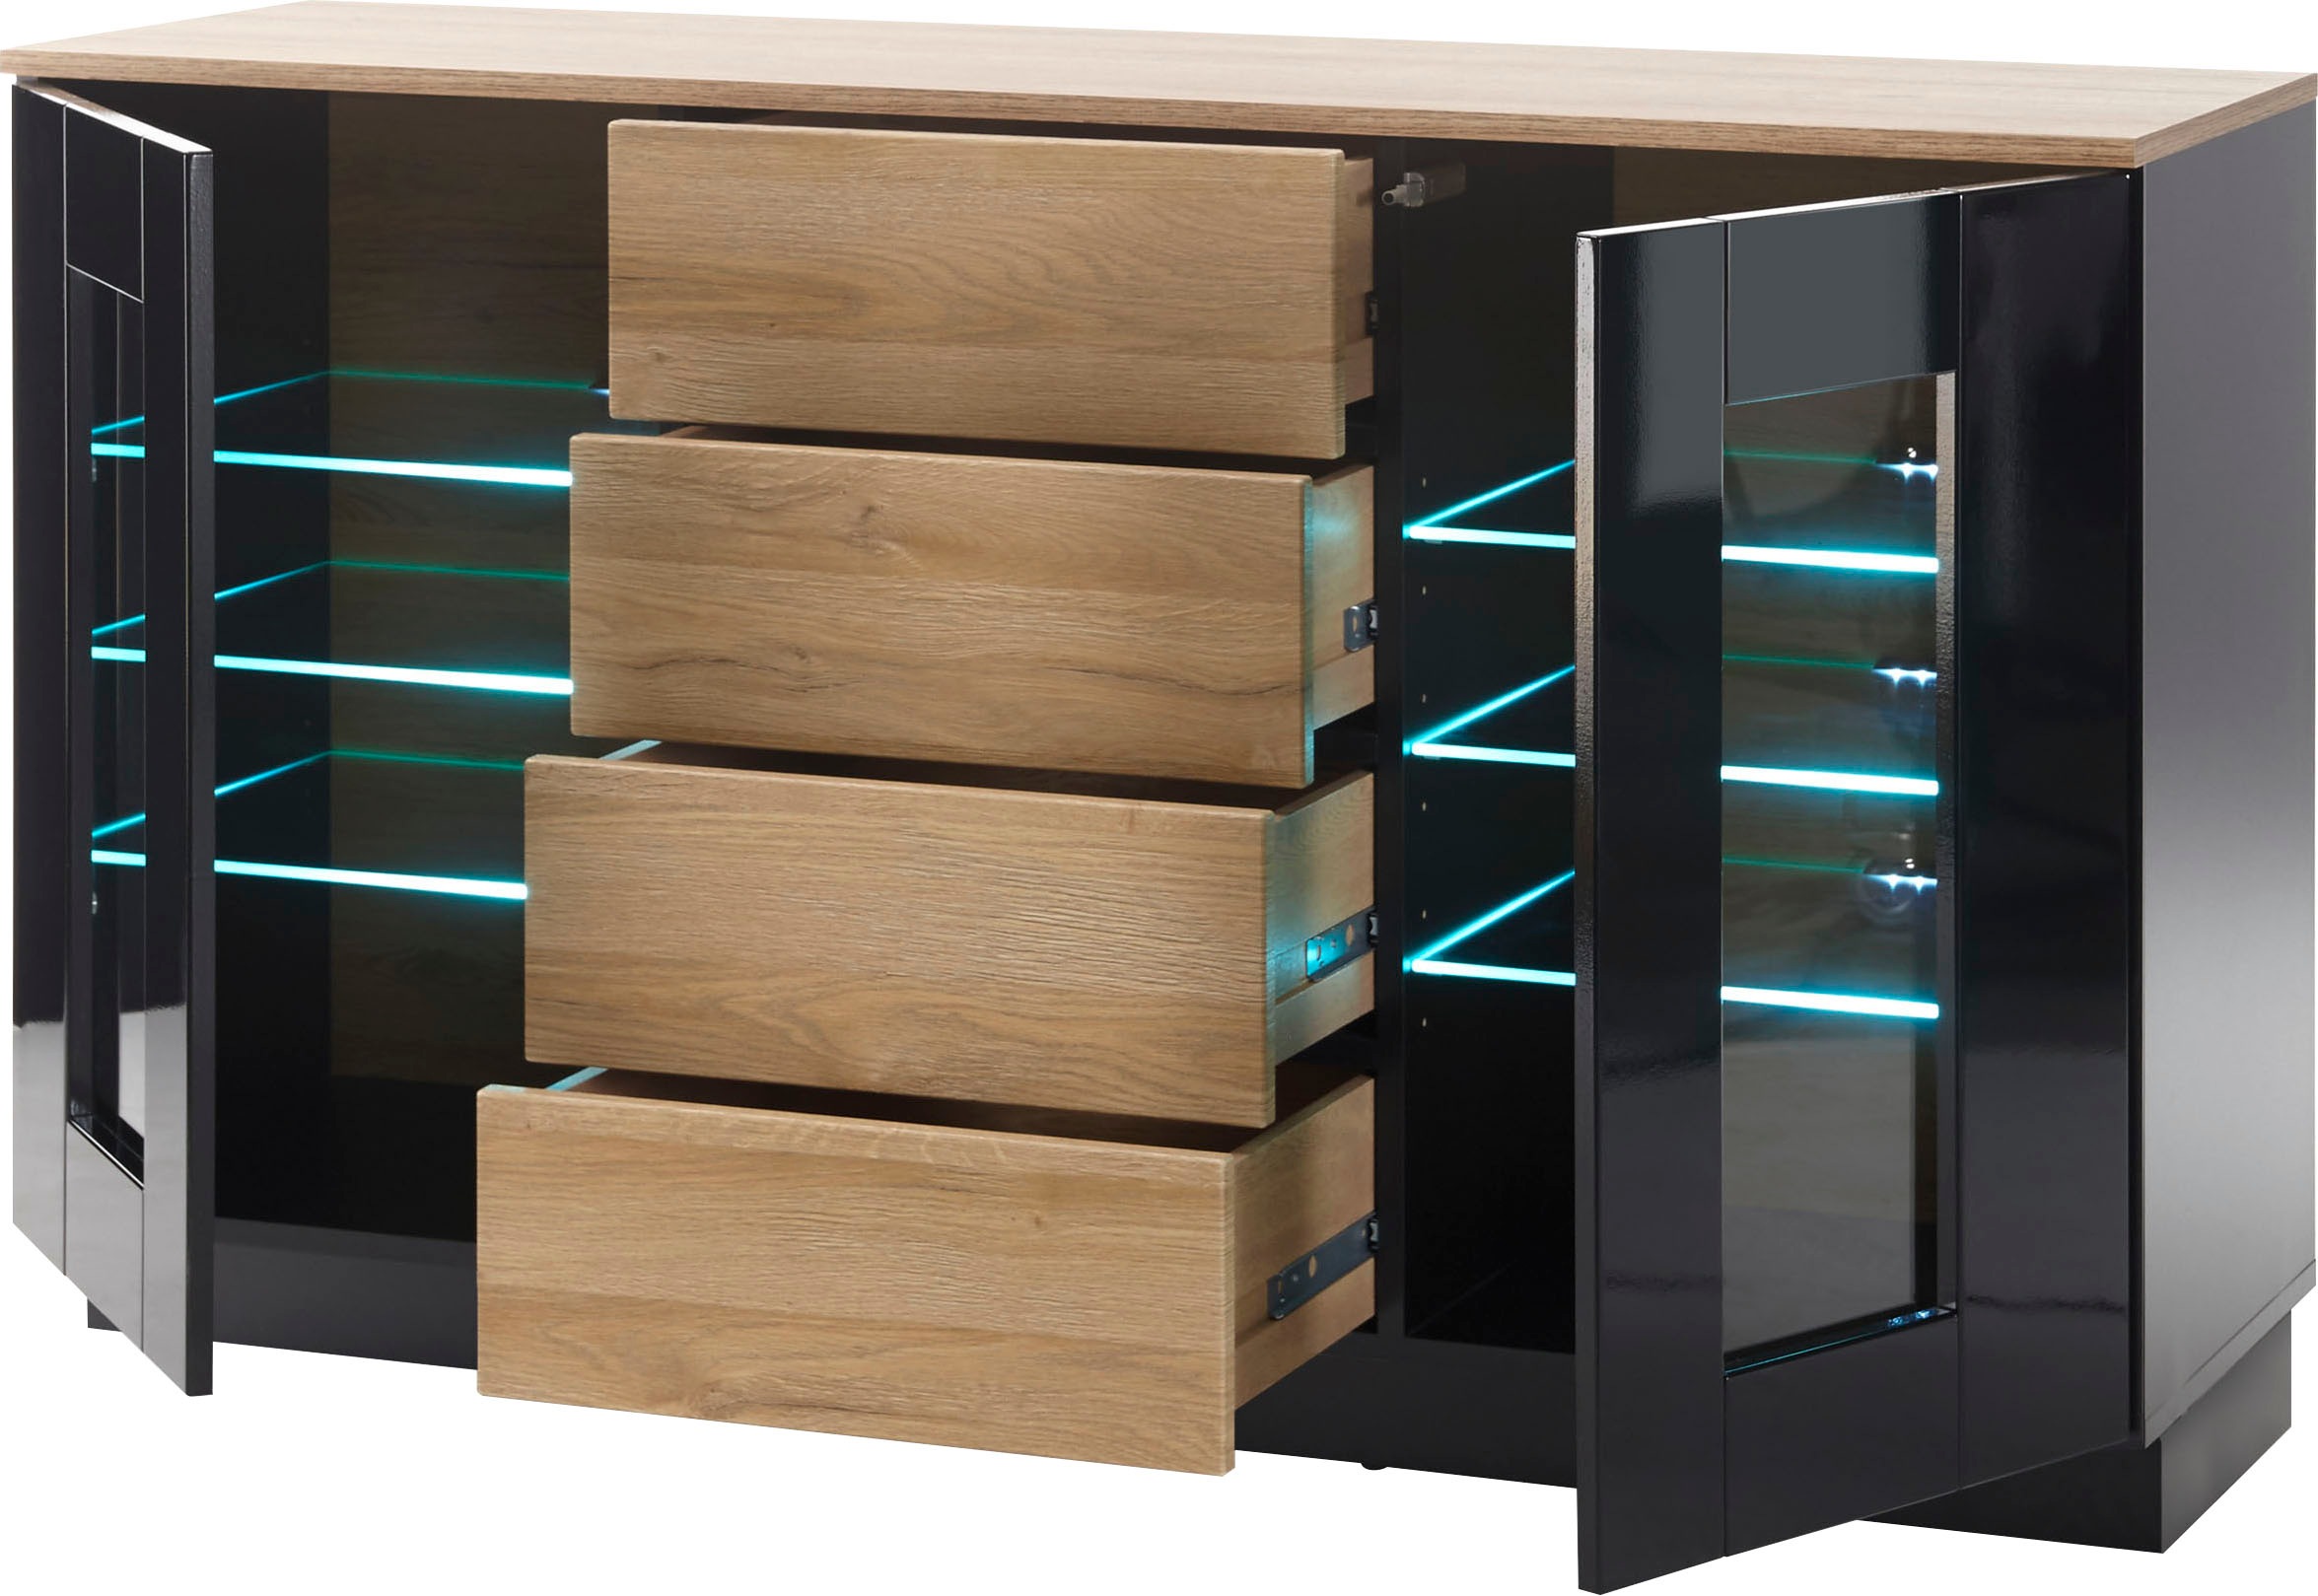 Places of Style Sideboard »Cayman«, bei Design im OTTO modernen